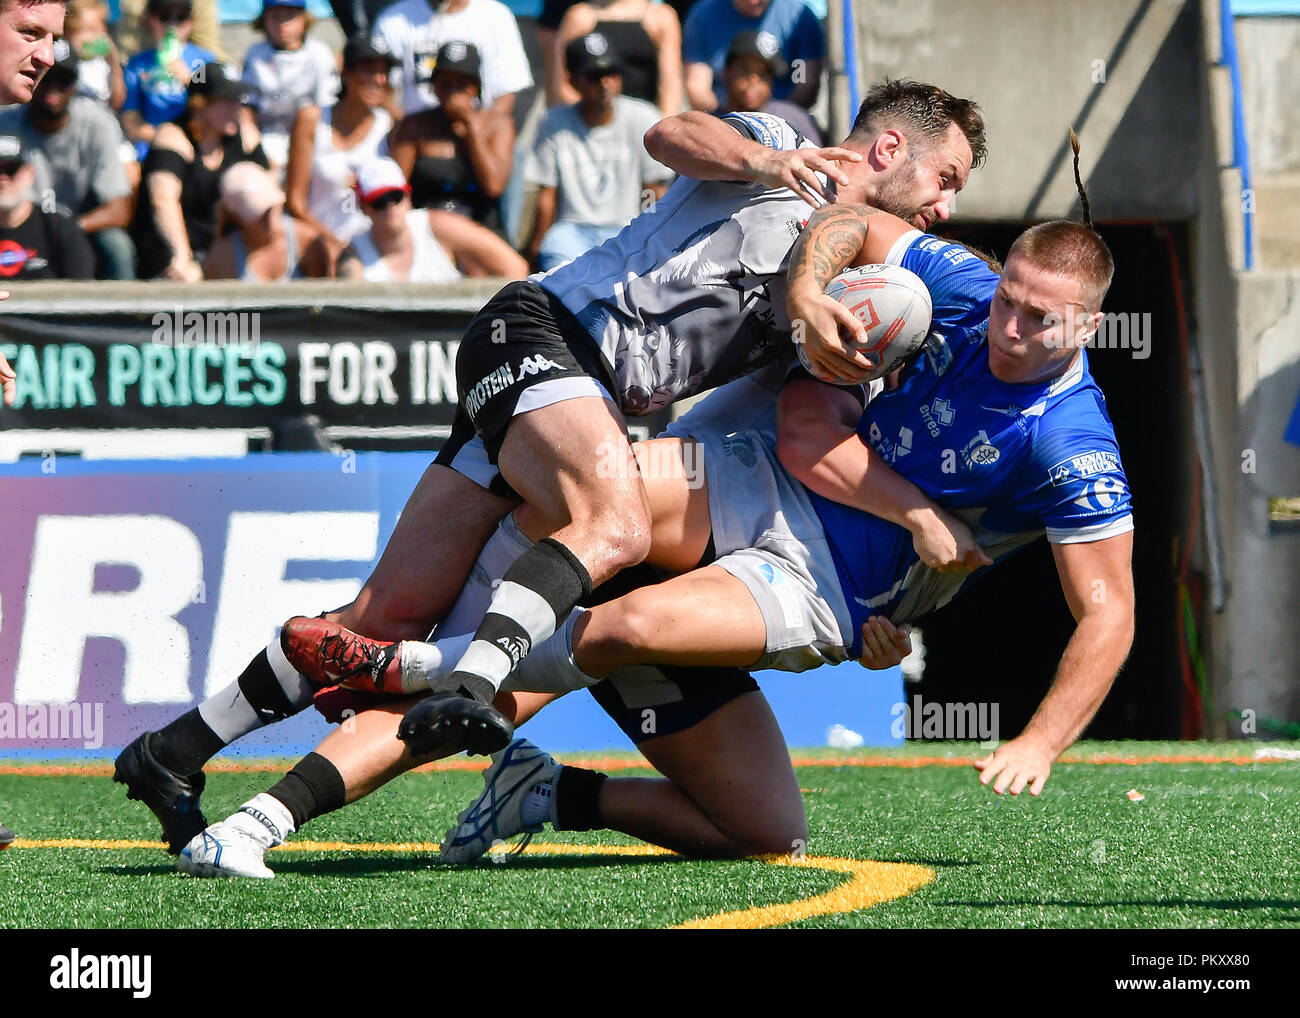 Lamport Stadium, Toronto, Ontario, Canada, 15th September 2018.   Bob Beswick of Toronto Wolfpack tackles Tyla Hepi of Toulouse Olympique during Toronto Wolfpack v Toulouse Olympique in the Super 8's The Qualifiers.   Credit: Touchlinepics/Alamy Live News Stock Photo